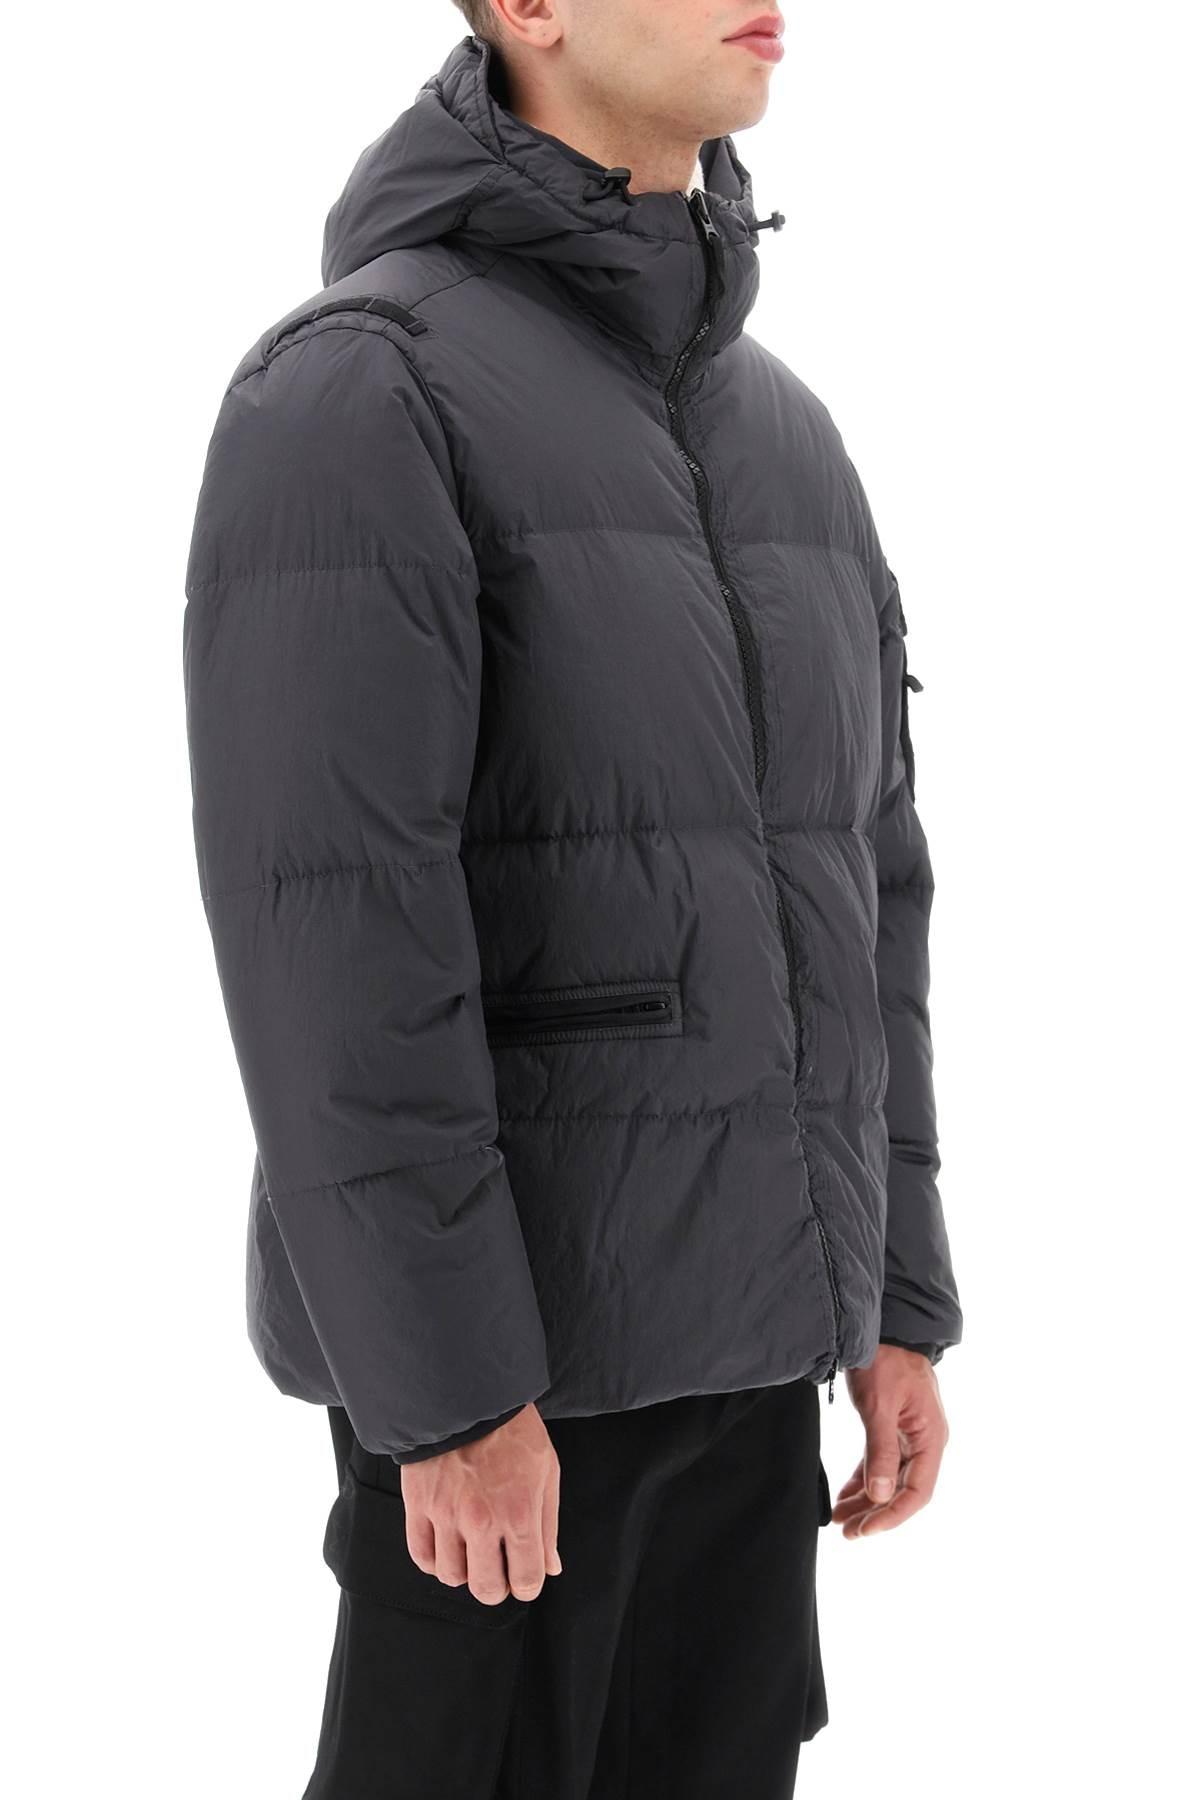 Stone Island Hooded Down Jacket In Garment Dyed Crinkle Reps R 